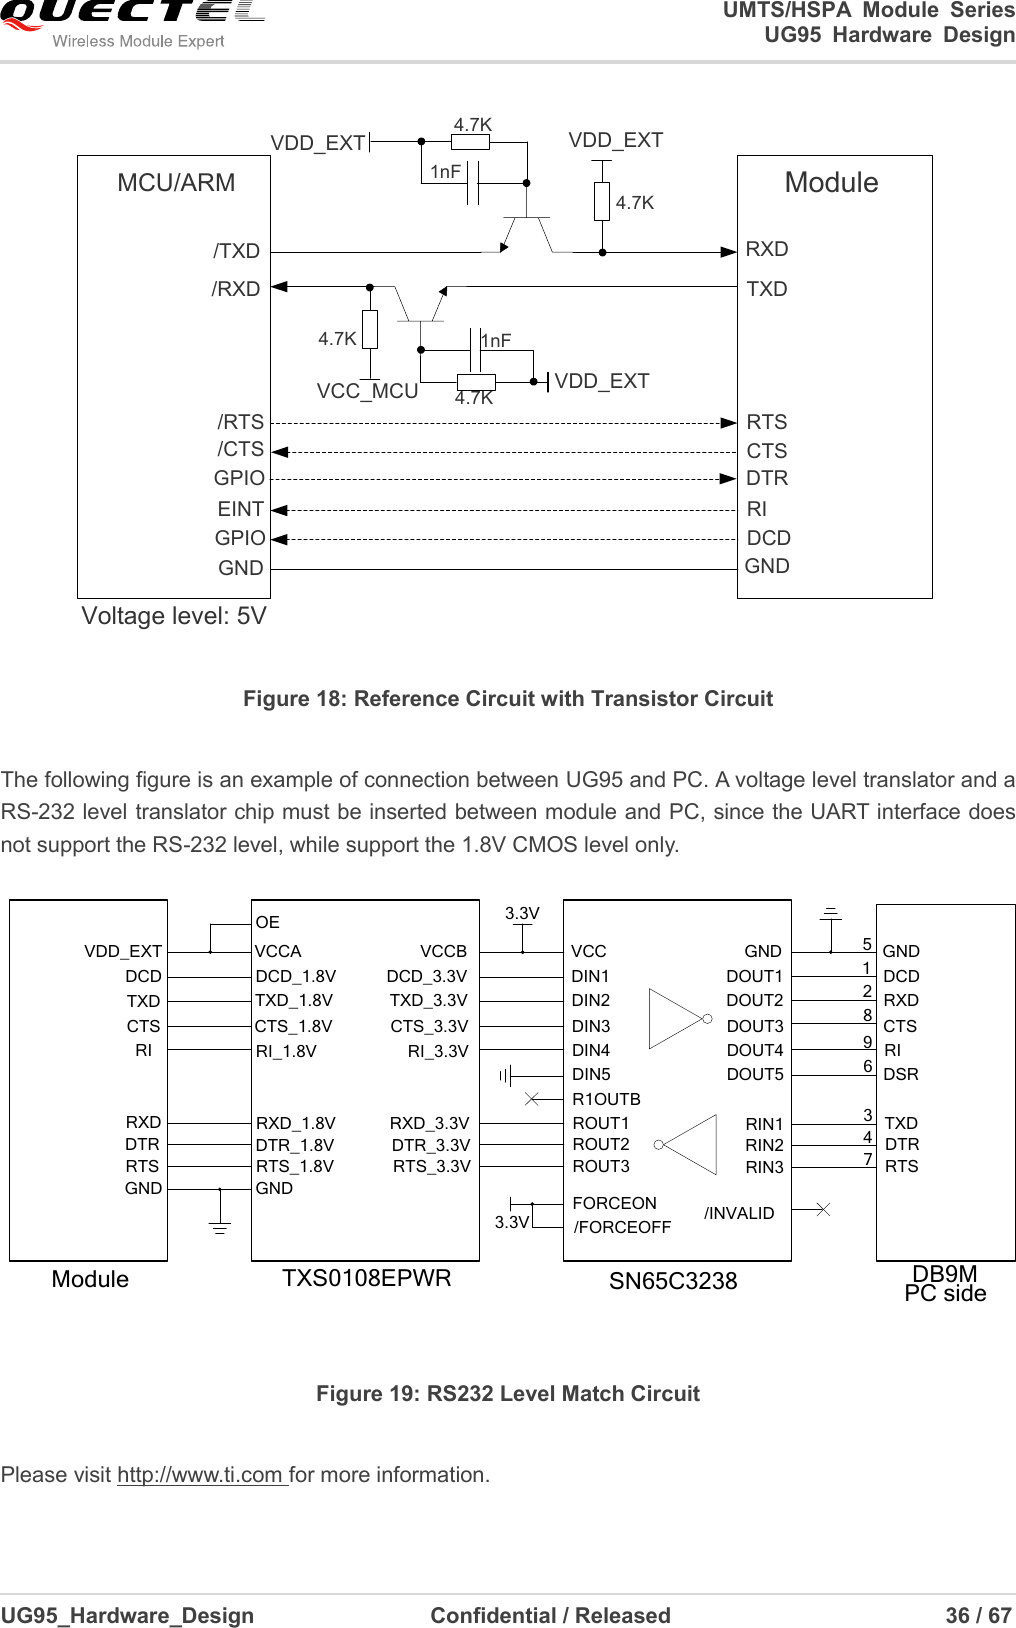                                                                                                                                               UMTS/HSPA  Module  Series                                                                 UG95  Hardware  Design  UG95_Hardware_Design                  Confidential / Released                             36 / 67    MCU/ARM/TXD/RXDVDD_EXT4.7KVCC_MCU 4.7K4.7KVDD_EXTTXDRXDRTSCTSDTRRI/RTS/CTSGNDGPIO DCDModuleGPIOEINTVDD_EXTVoltage level: 5V4.7KGND1nF1nF Figure 18: Reference Circuit with Transistor Circuit  The following figure is an example of connection between UG95 and PC. A voltage level translator and a RS-232 level translator chip must be inserted between module and PC, since the UART interface does not support the RS-232 level, while support the 1.8V CMOS level only.    TXS0108EPWRDCD_3.3VRTS_3.3VDTR_3.3VRXD_3.3VRI_3.3VCTS_3.3VTXD_3.3VDCDRTSDTRRXDRICTSTXDDCD_1.8VRTS_1.8VDTR_1.8VRXD_1.8VRI_1.8VCTS_1.8VTXD_1.8VVCCAModuleGND GNDVDD_EXT VCCB3.3VDIN1ROUT3ROUT2ROUT1DIN4DIN3DIN2DIN5R1OUTBFORCEON/FORCEOFF /INVALID3.3VDOUT1DOUT2DOUT3DOUT4DOUT5RIN3RIN2RIN1VCC GNDOESN65C3238 DB9MPC sideDCDRTSDTRTXDRICTSRXDDSRGND123456789 Figure 19: RS232 Level Match Circuit  Please visit http://www.ti.com for more information.   